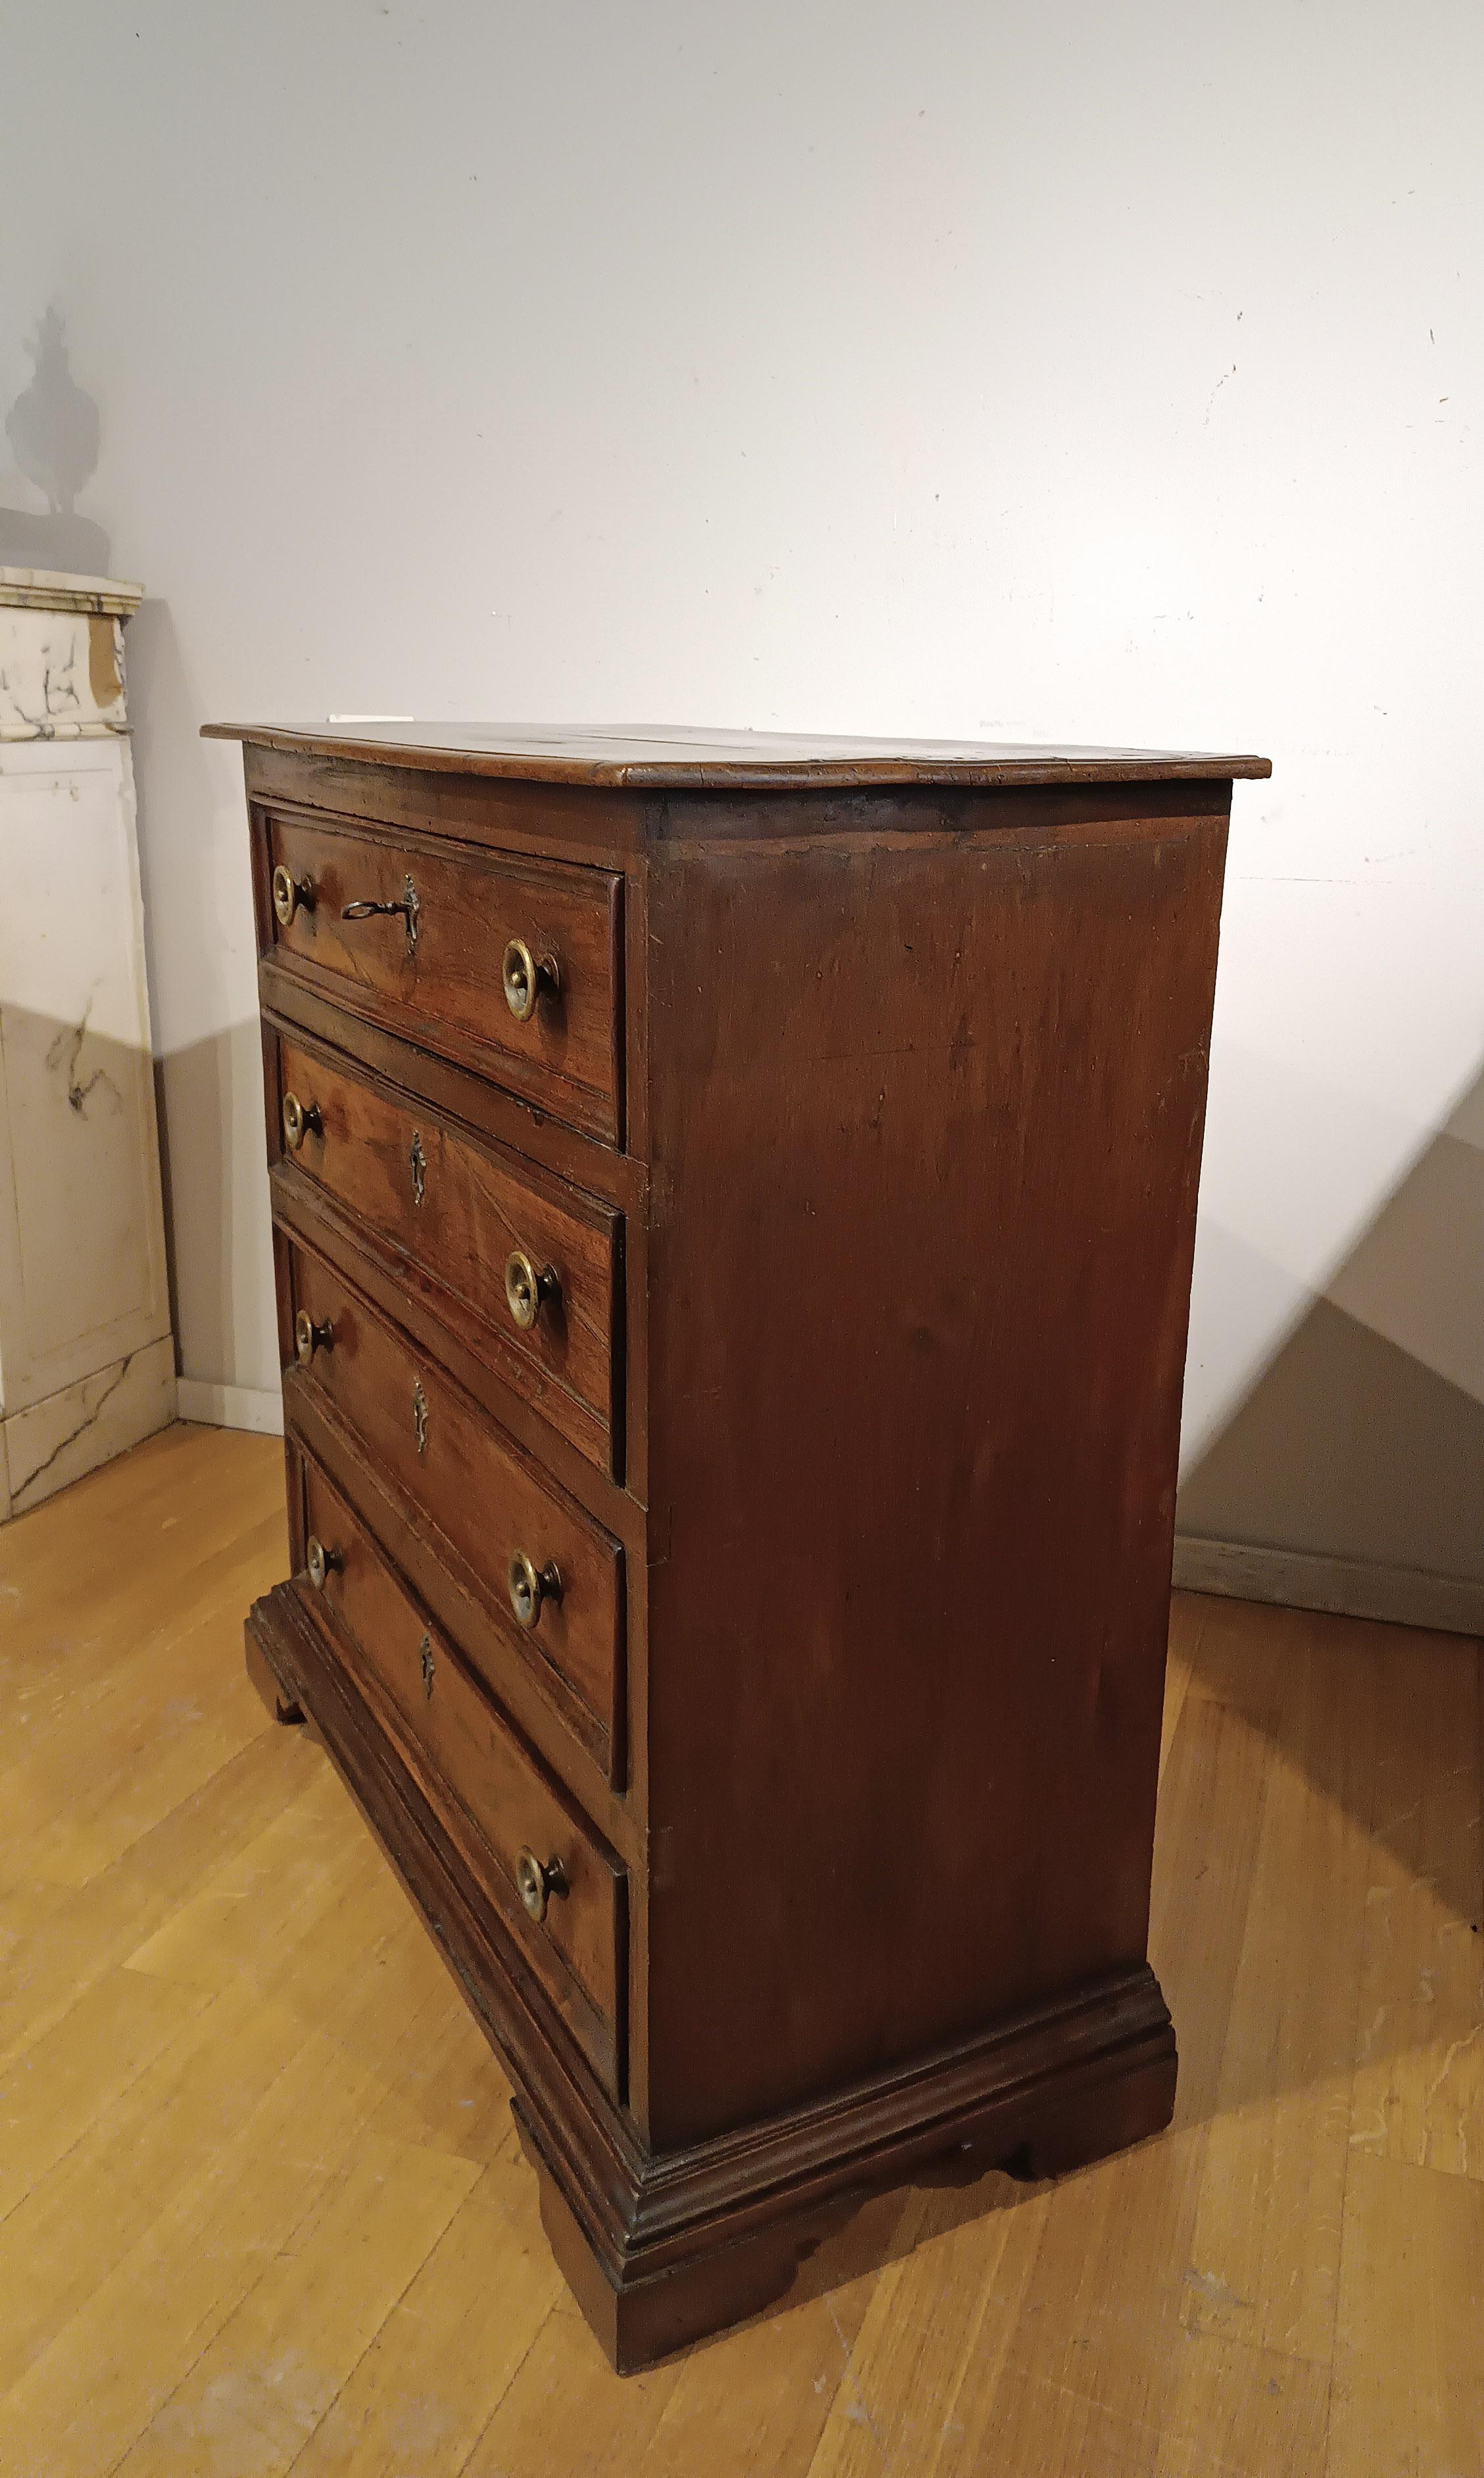 Hand-Carved 17th CENTURY CHEST OF DRAWERS IN SOLID AND VENEREED WALNUT